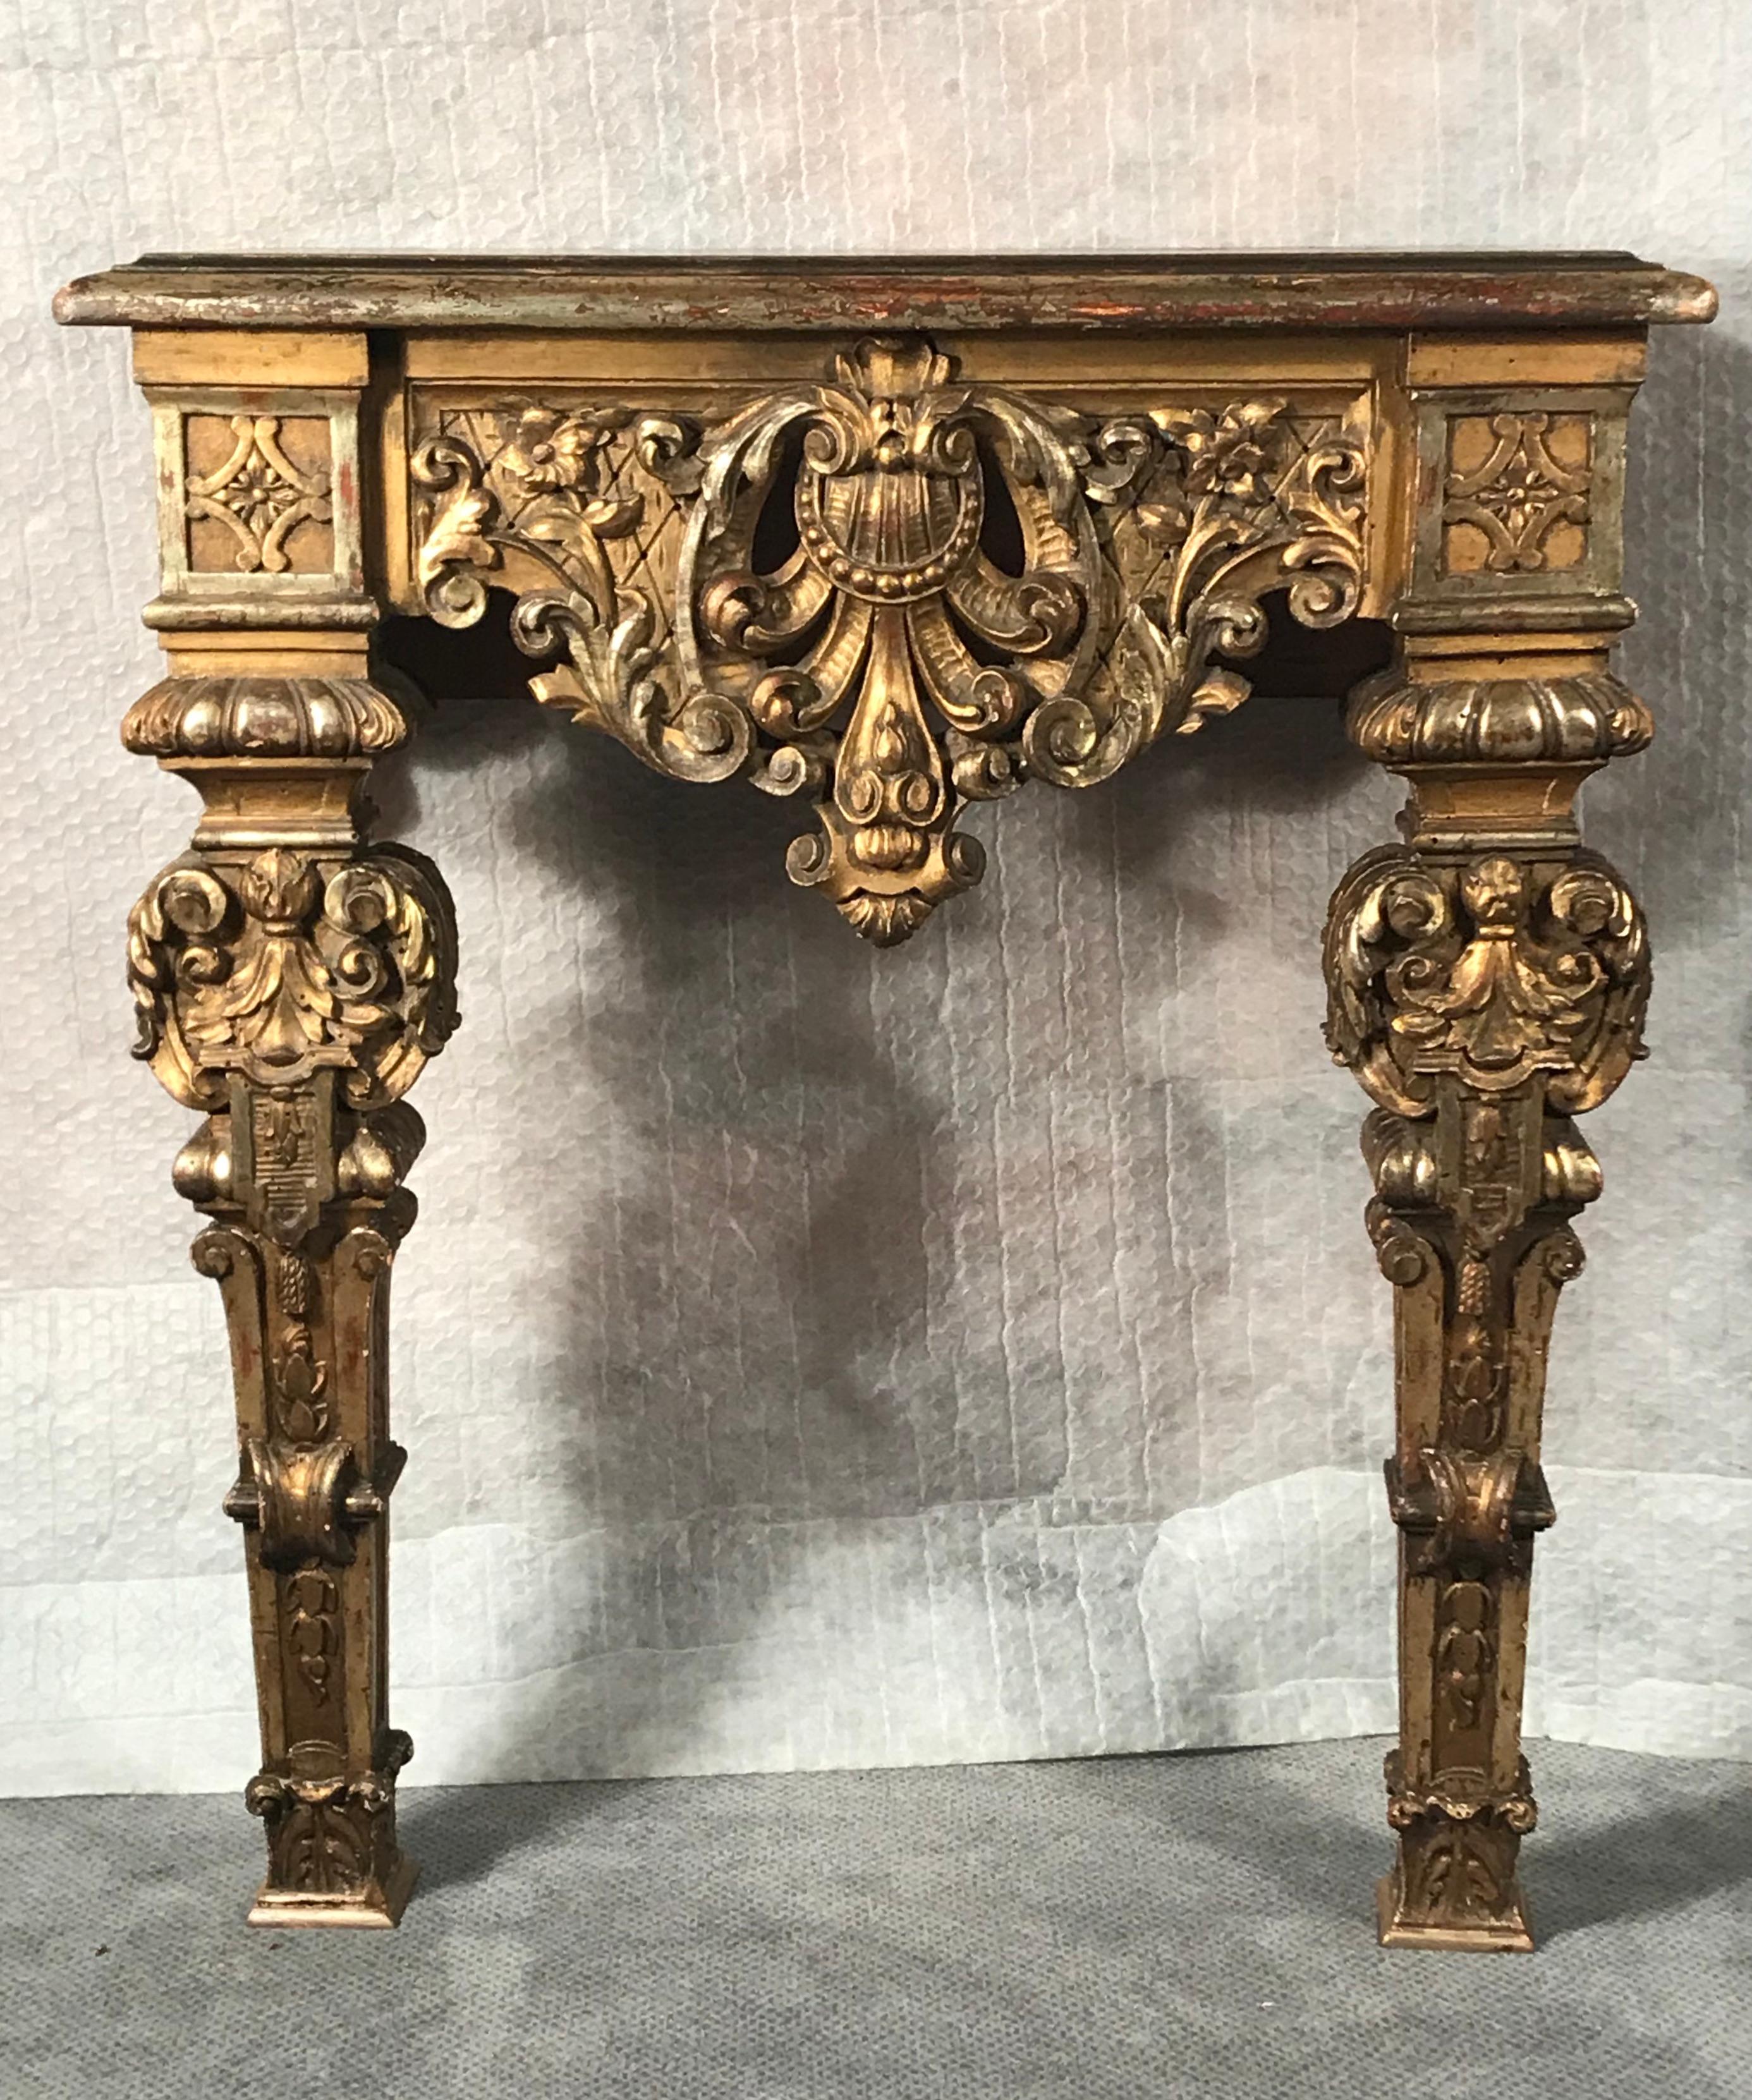 This original 18th century Baroque console table stands out for its finely carved gilt wood details. It is the perfect little eye catcher for a smaller entryway. If you are looking for an eclectic mix of antique and new, you could easily add a